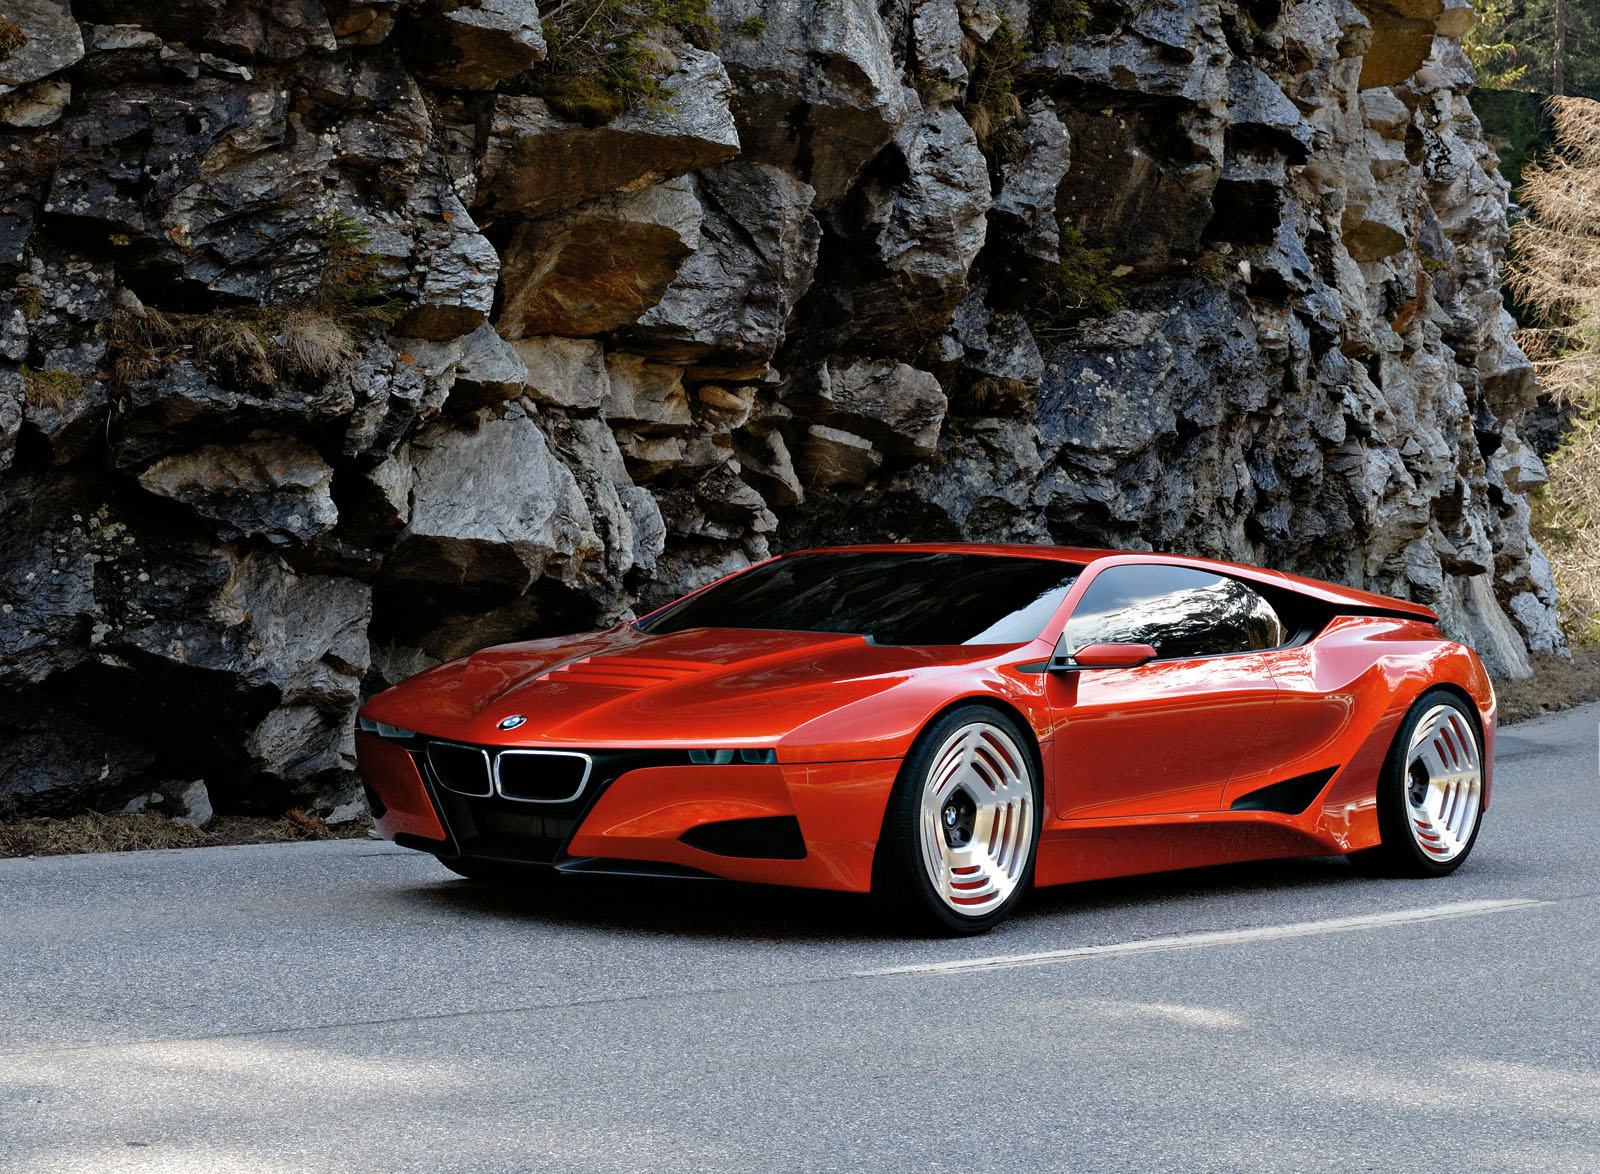 BMW M1 | HD Wallpapers (High Definition)|HDwalle